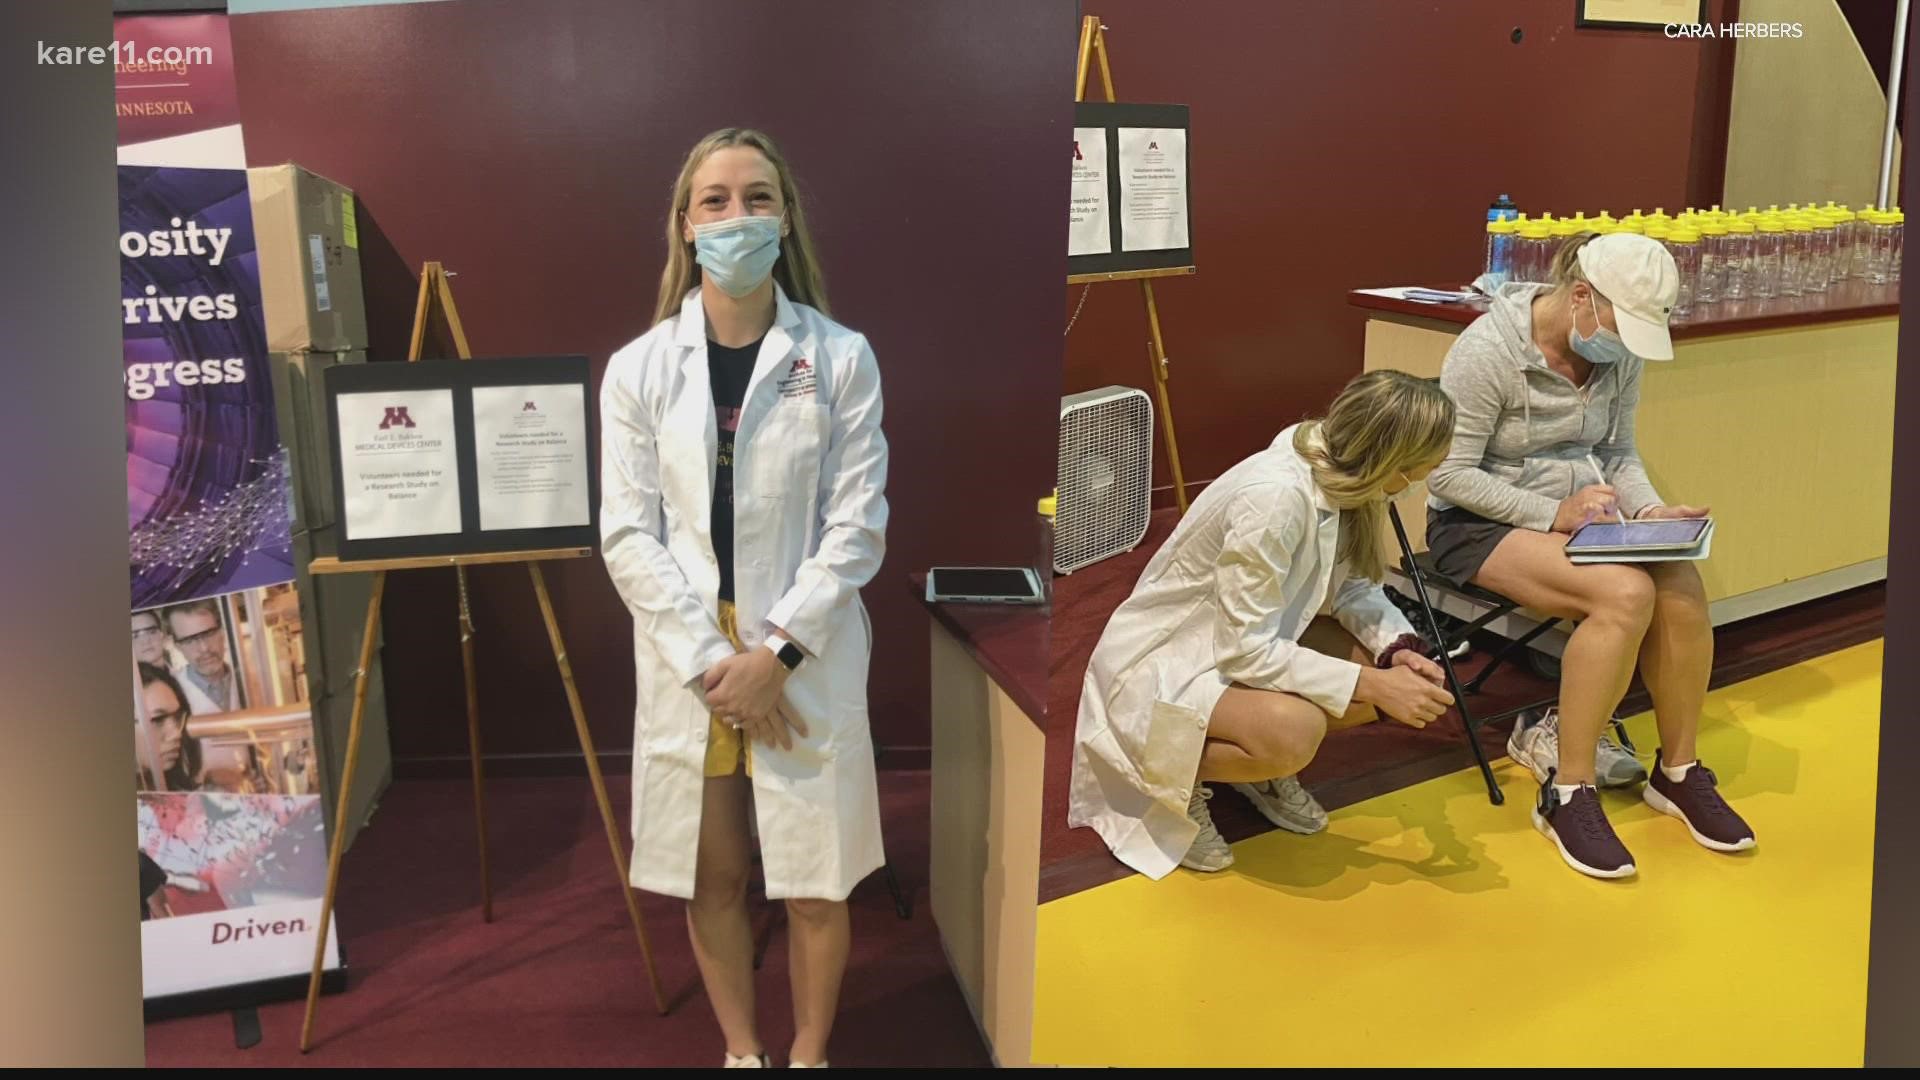 Cara Herbers was co-captain of the Gopher Women's Hockey team senior year before she graduated in 2018. Now she's lab supervisor at Bakken Medical Devices Center.